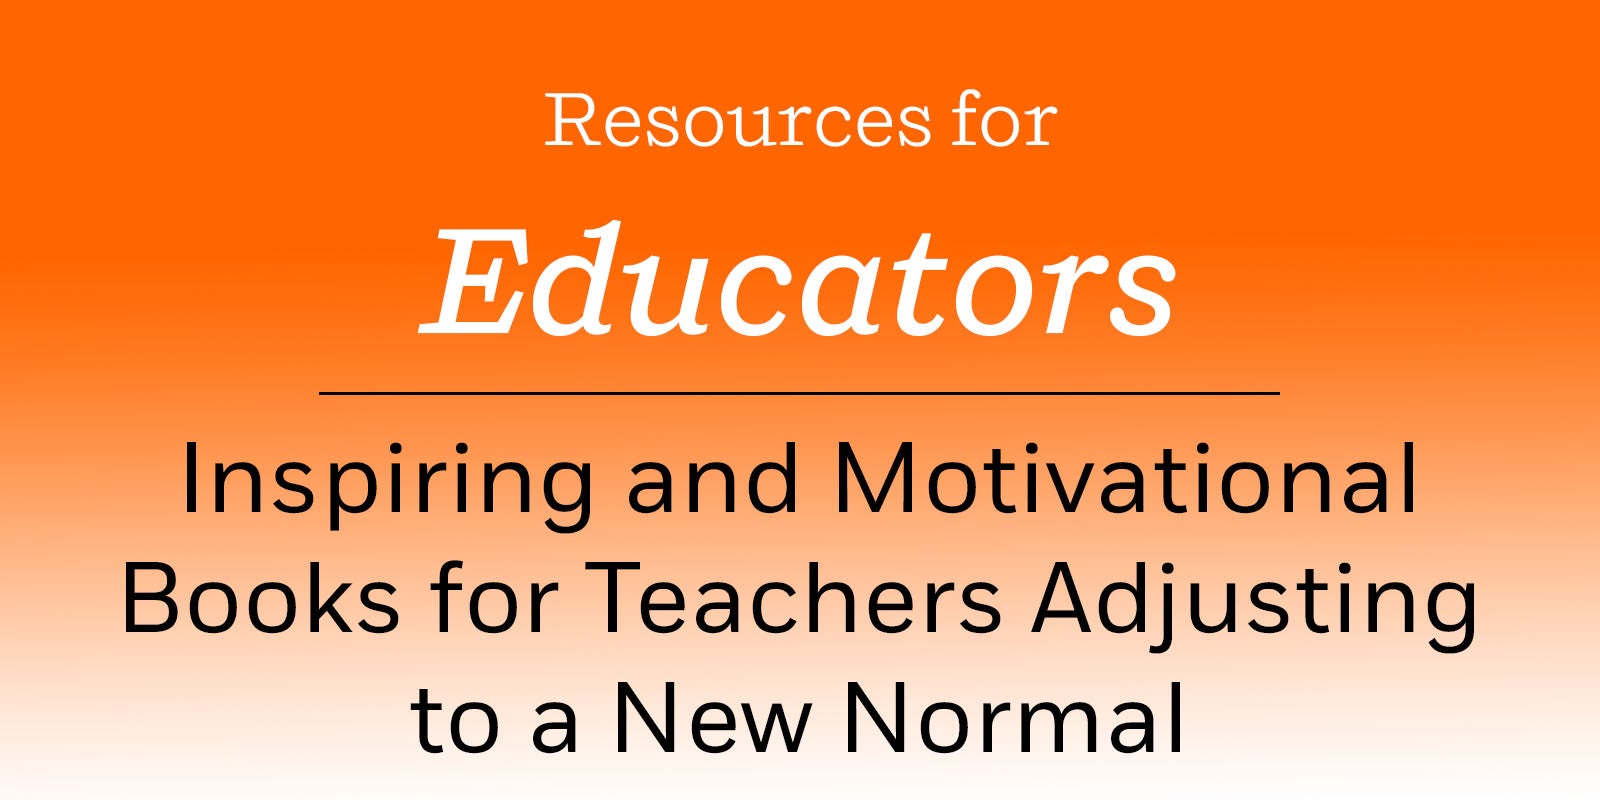 Inspiring and Motivational Books for Teachers Adjusting to a New Normal